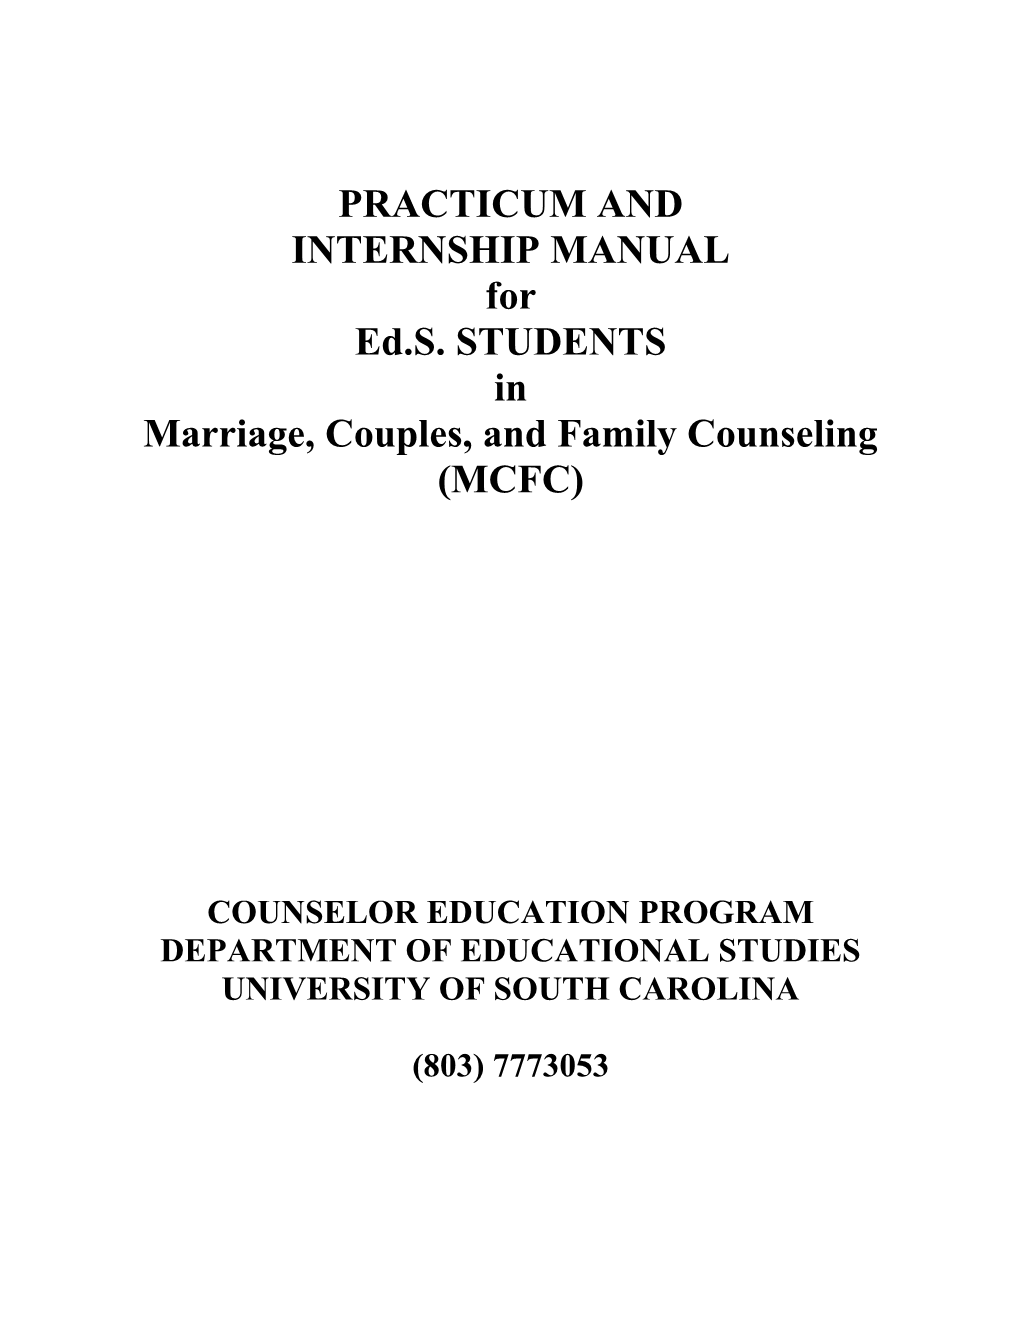 Marriage, Couples, and Family Counseling (MCFC)